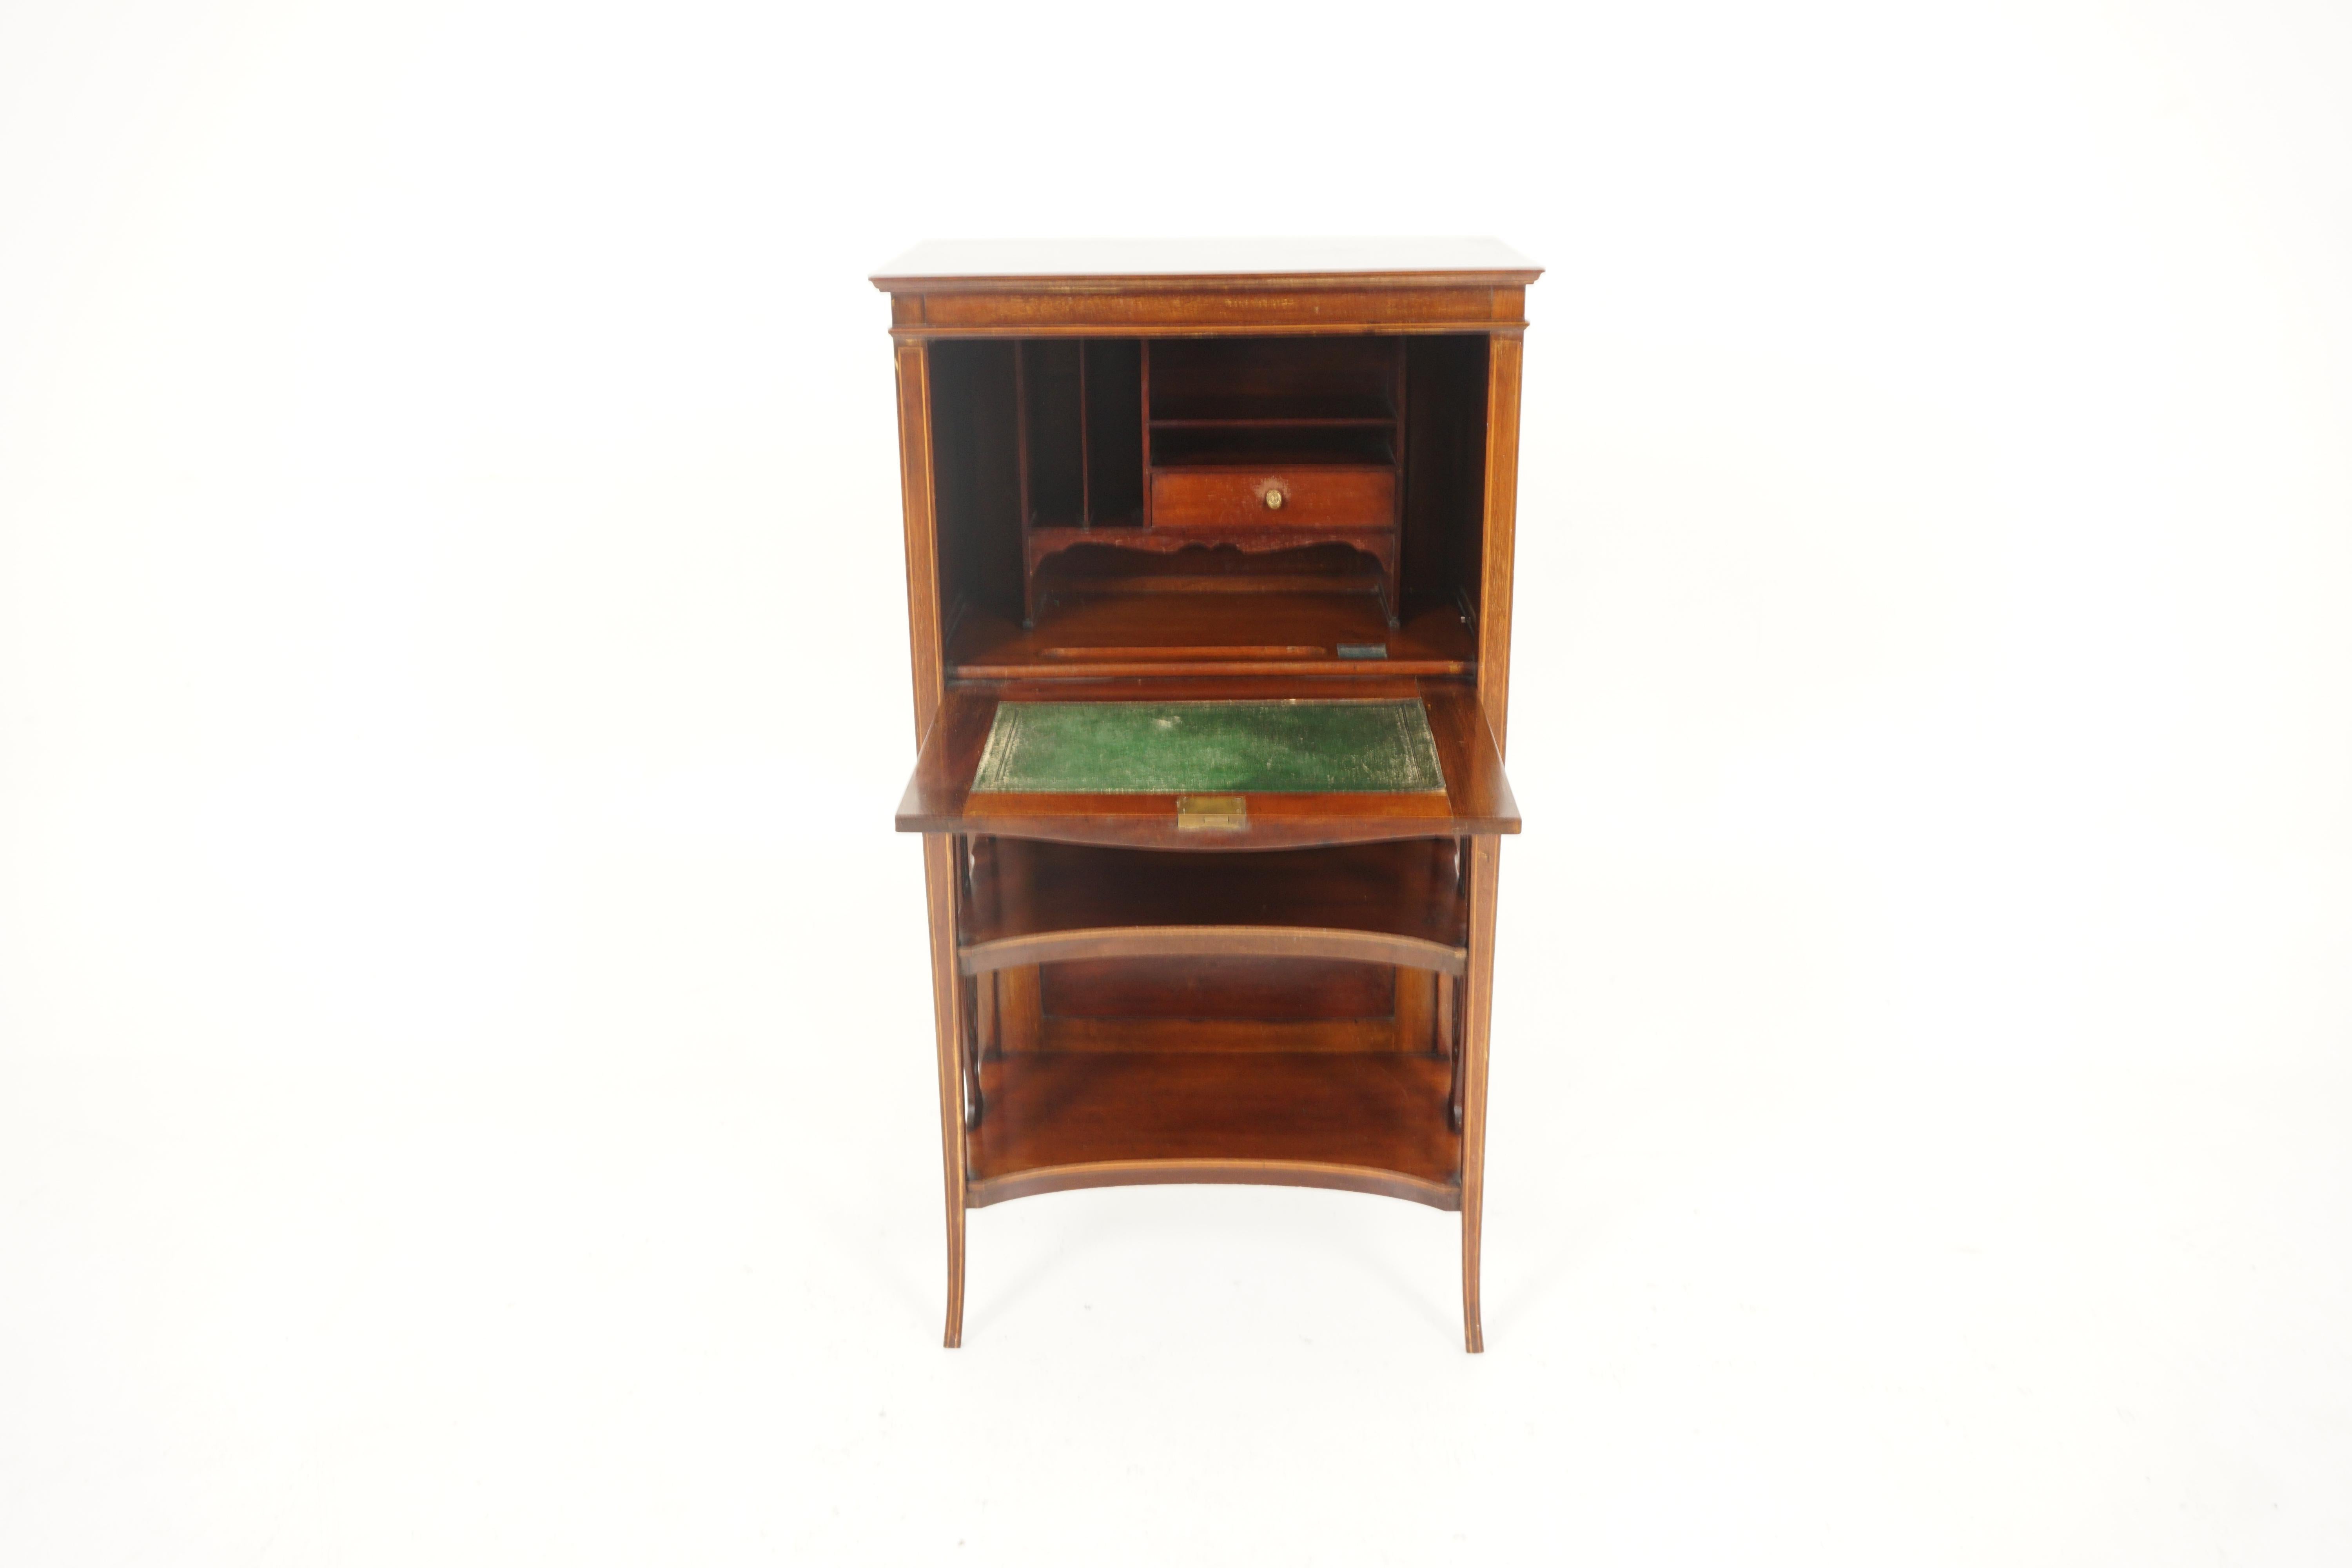 Edwardian walnut inlaid ladies writing drop front desk, Scotland 1910,  H246

Scotland 1910
Solid walnut and veneer
Original finish
Inlaid moulded top
With inlaid paneled front door that falls down to reveal a fitted interior
Leather writing